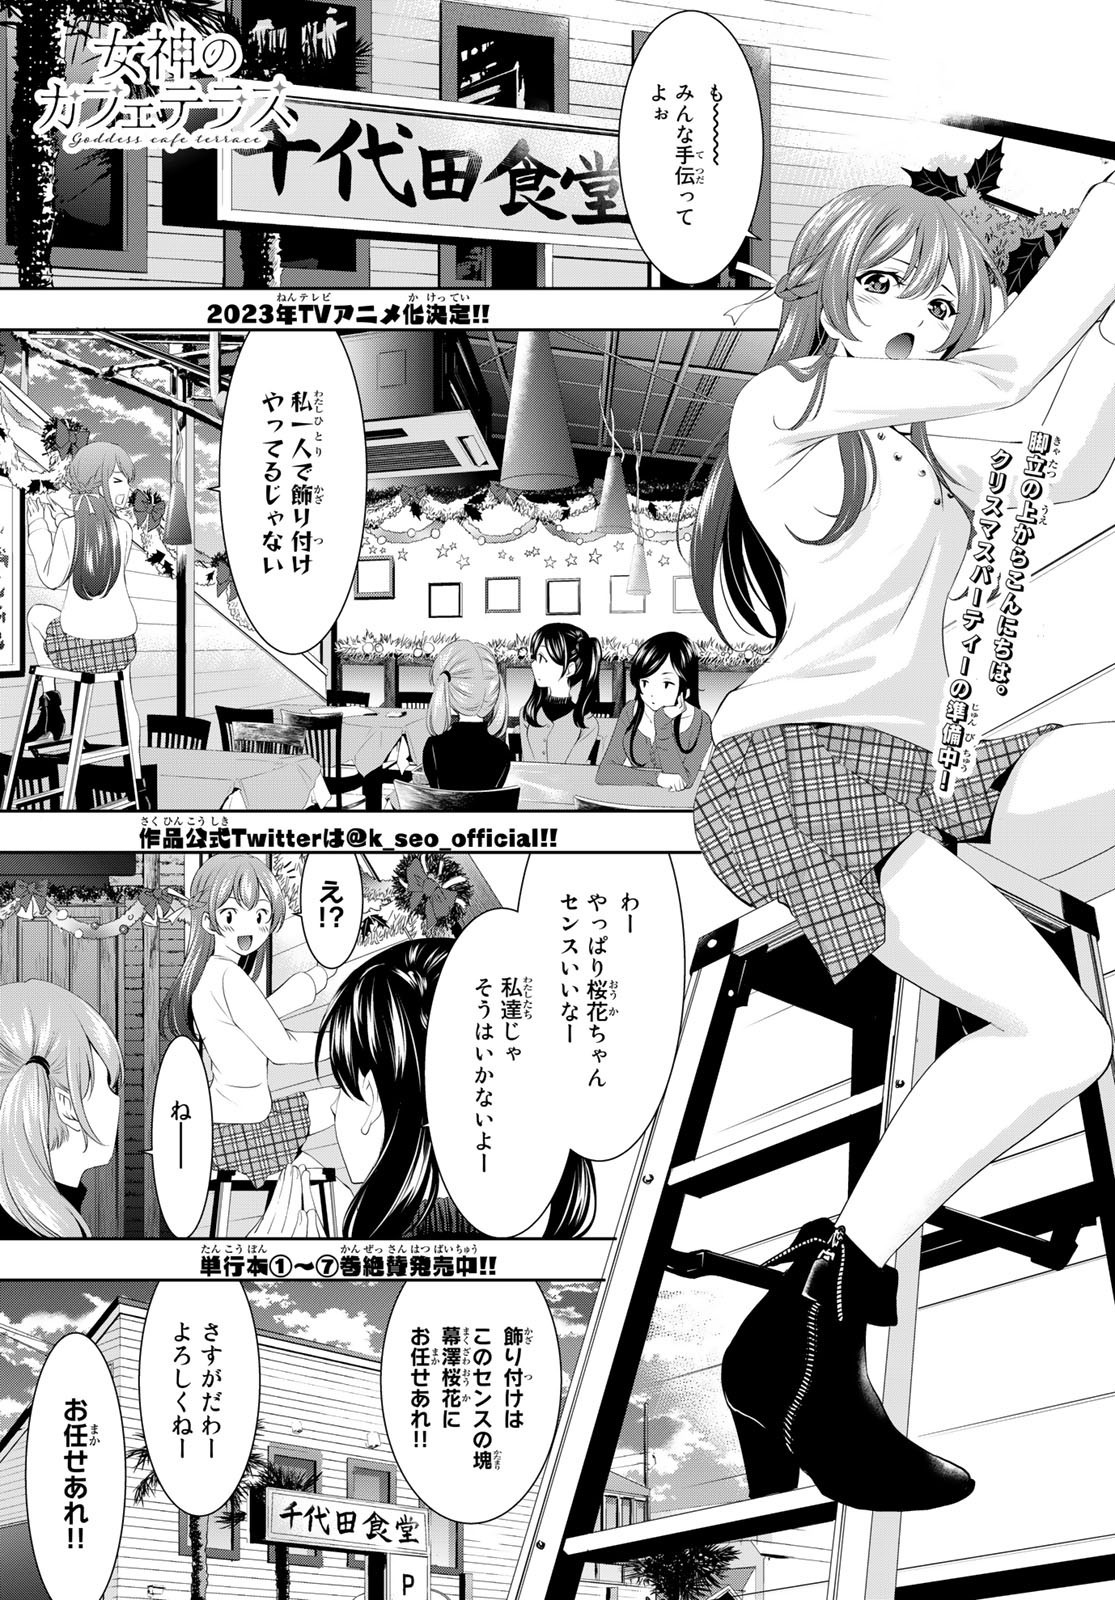 Goddess-Cafe-Terrace - Chapter 076 - Page 1